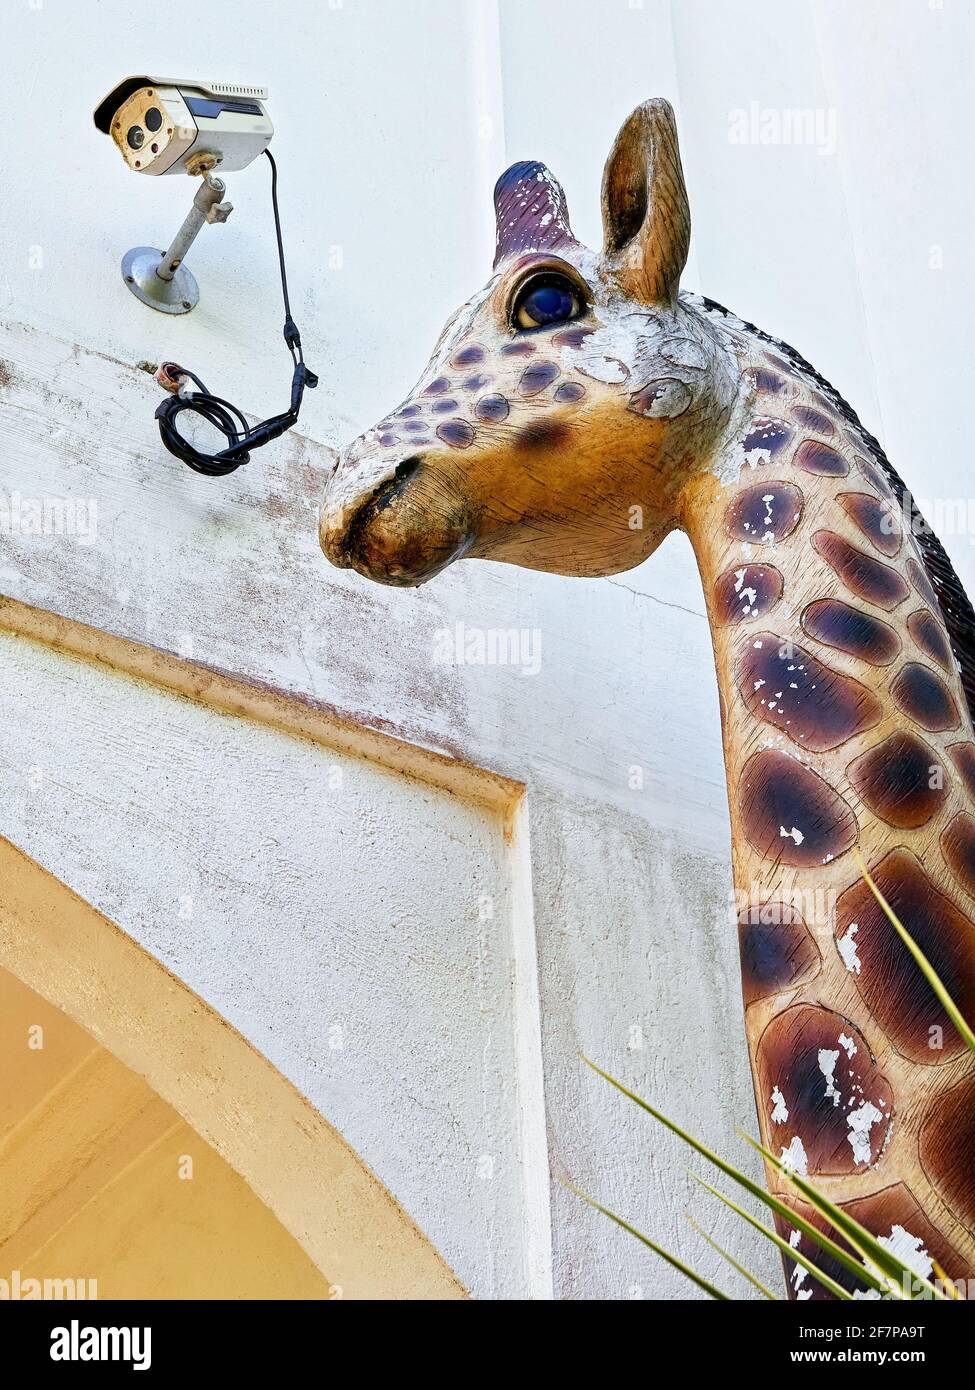 Close-up view of an old giraffe sculpture standing next to a public building wall, with a security camera attached to it, Philippines, Asia Stock Photo